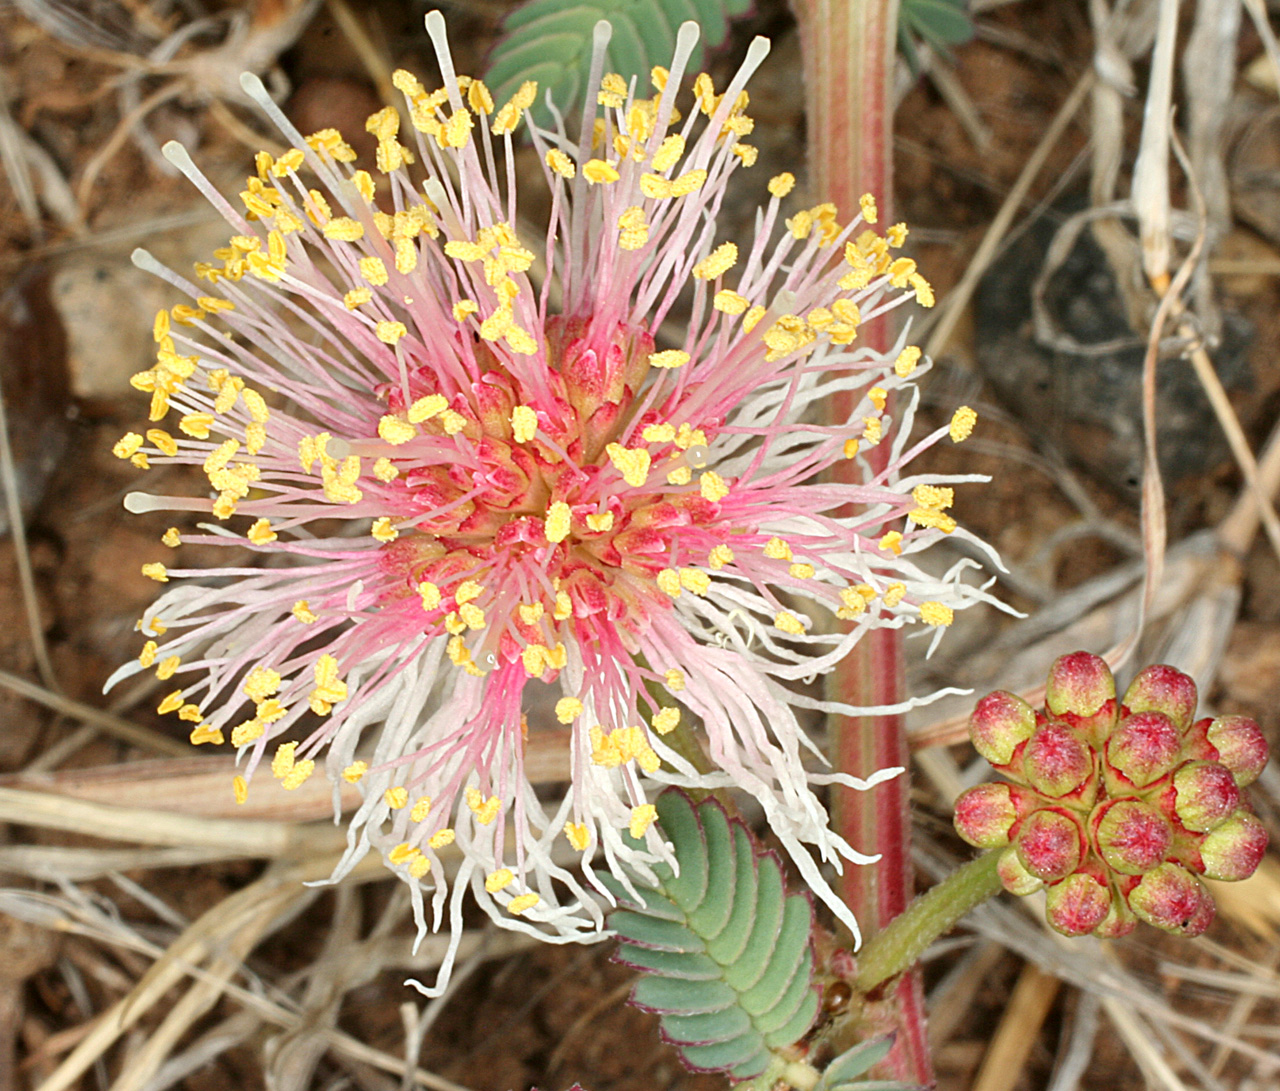 Red and white flowerhead with numerous pollen-tipped stamens